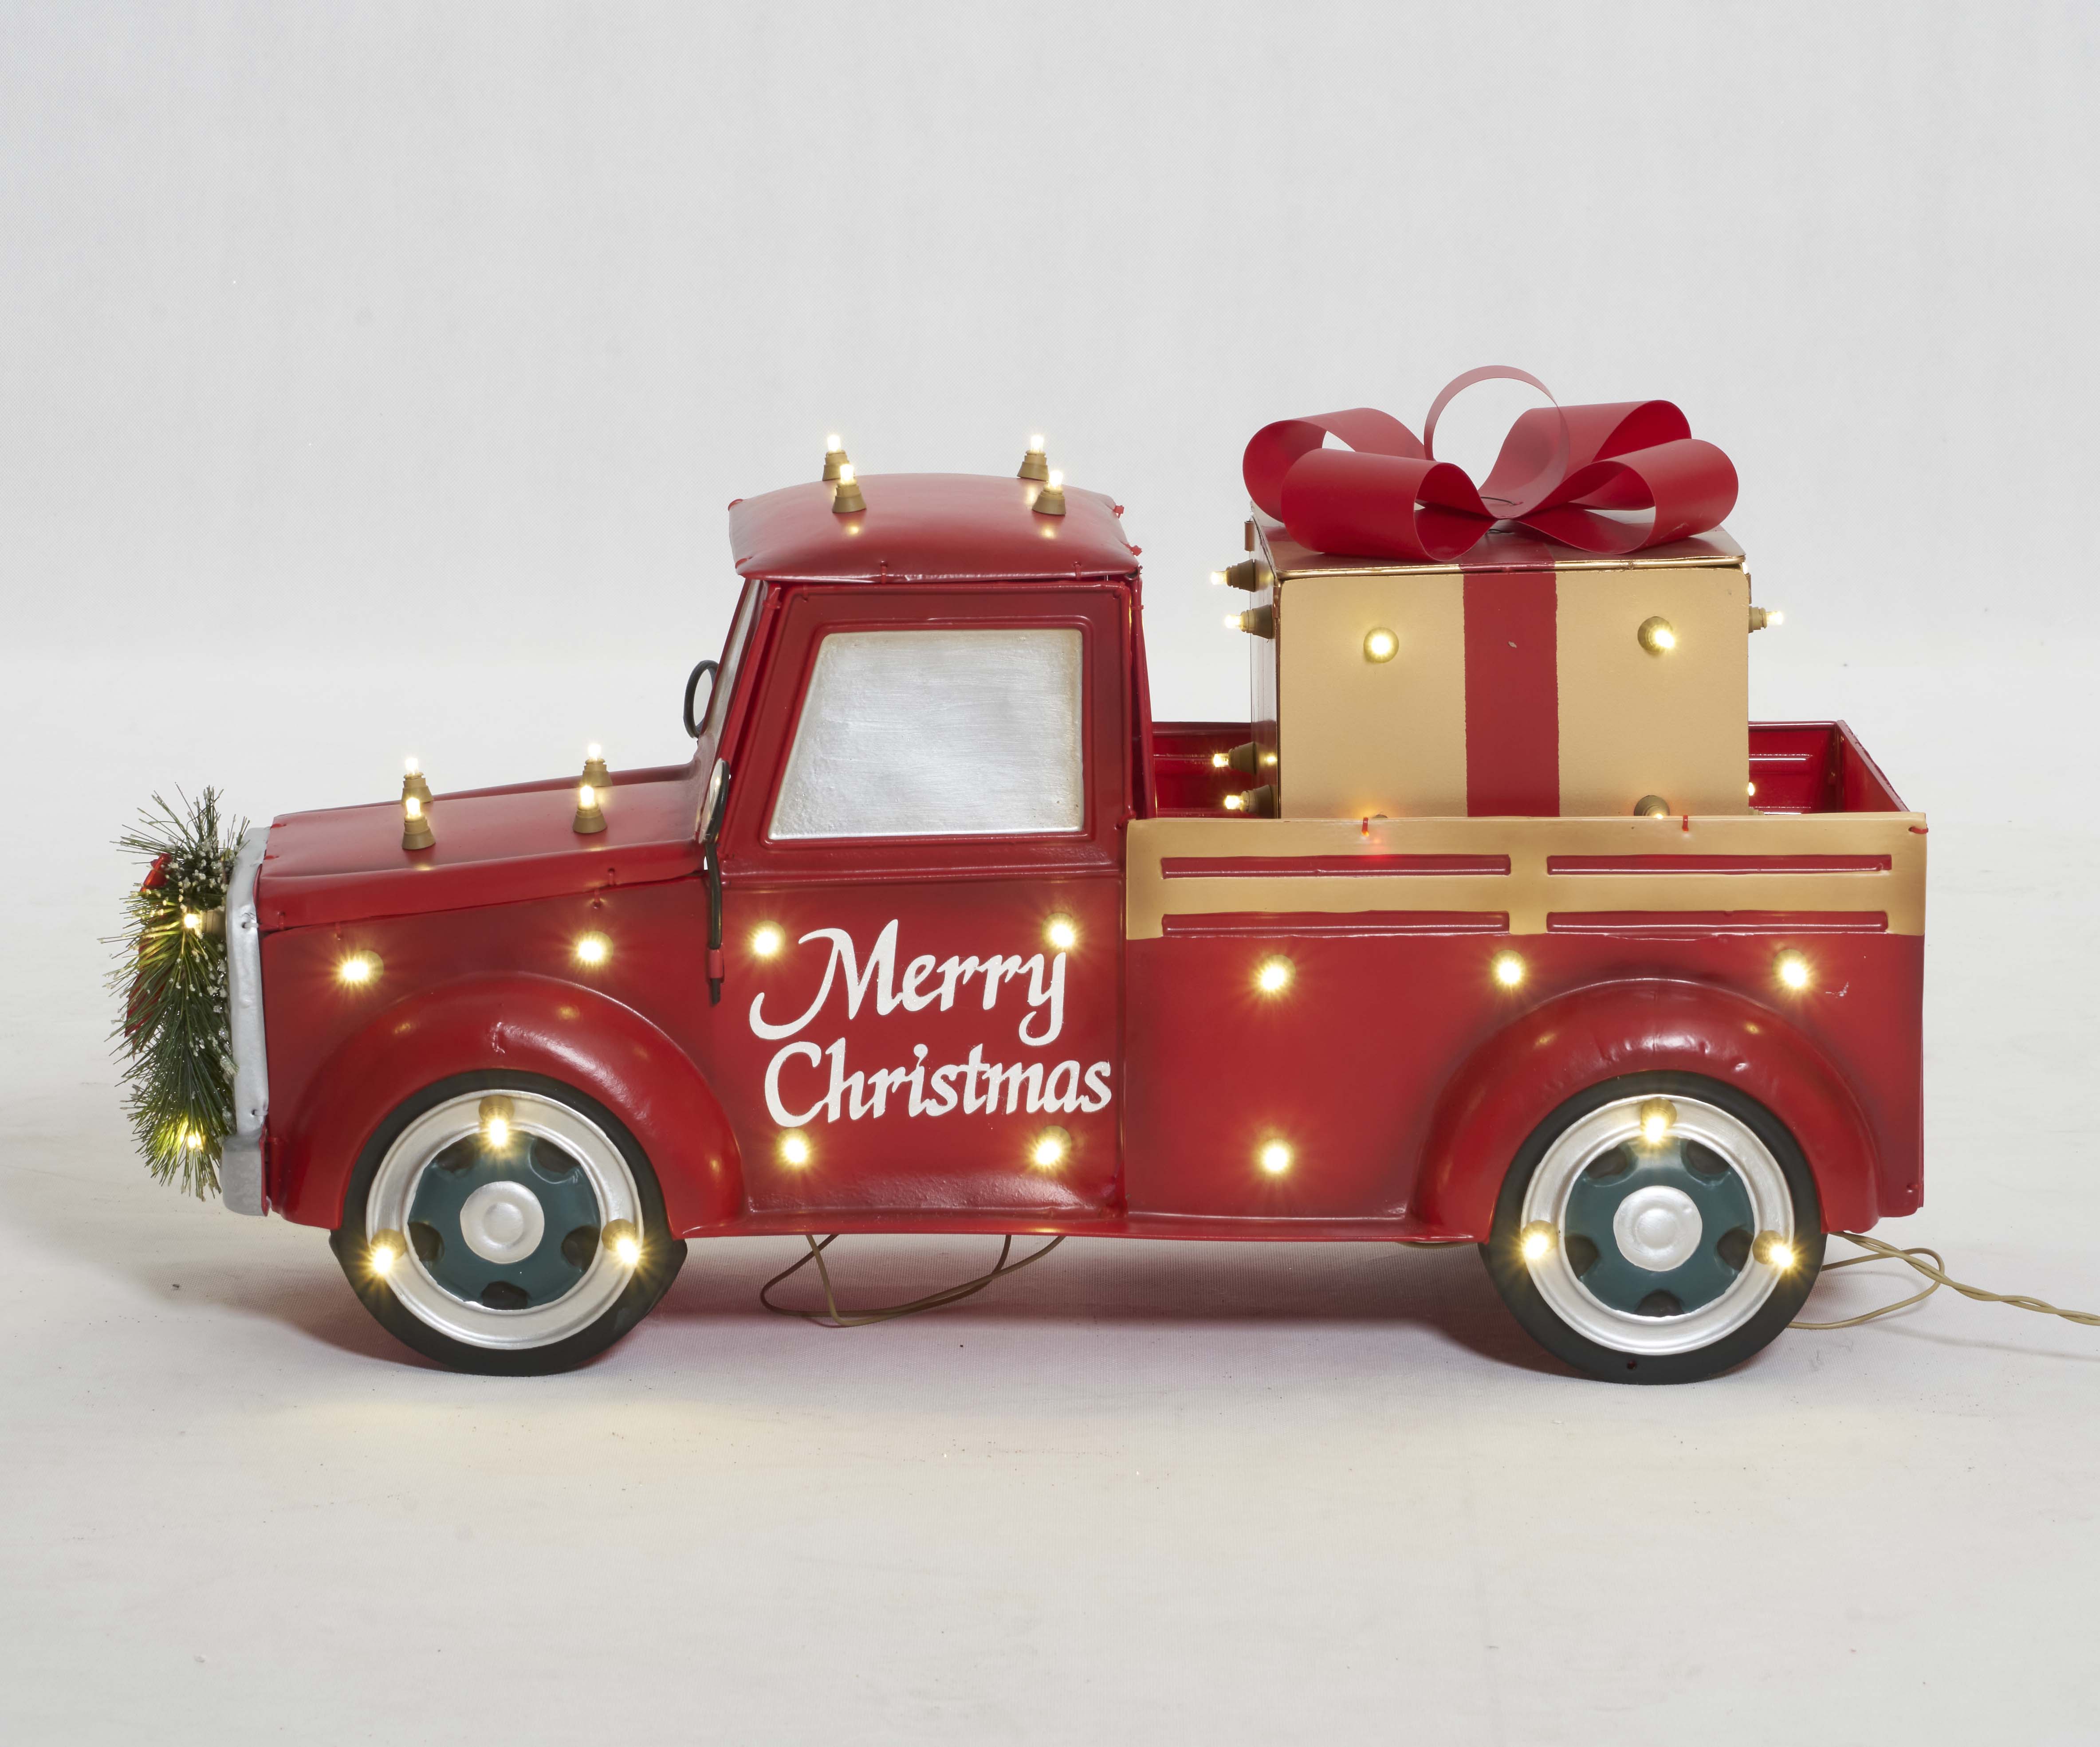 Everstar 28" UL LED TRUCK WITH GIFT BOX SCULPTURE, Red